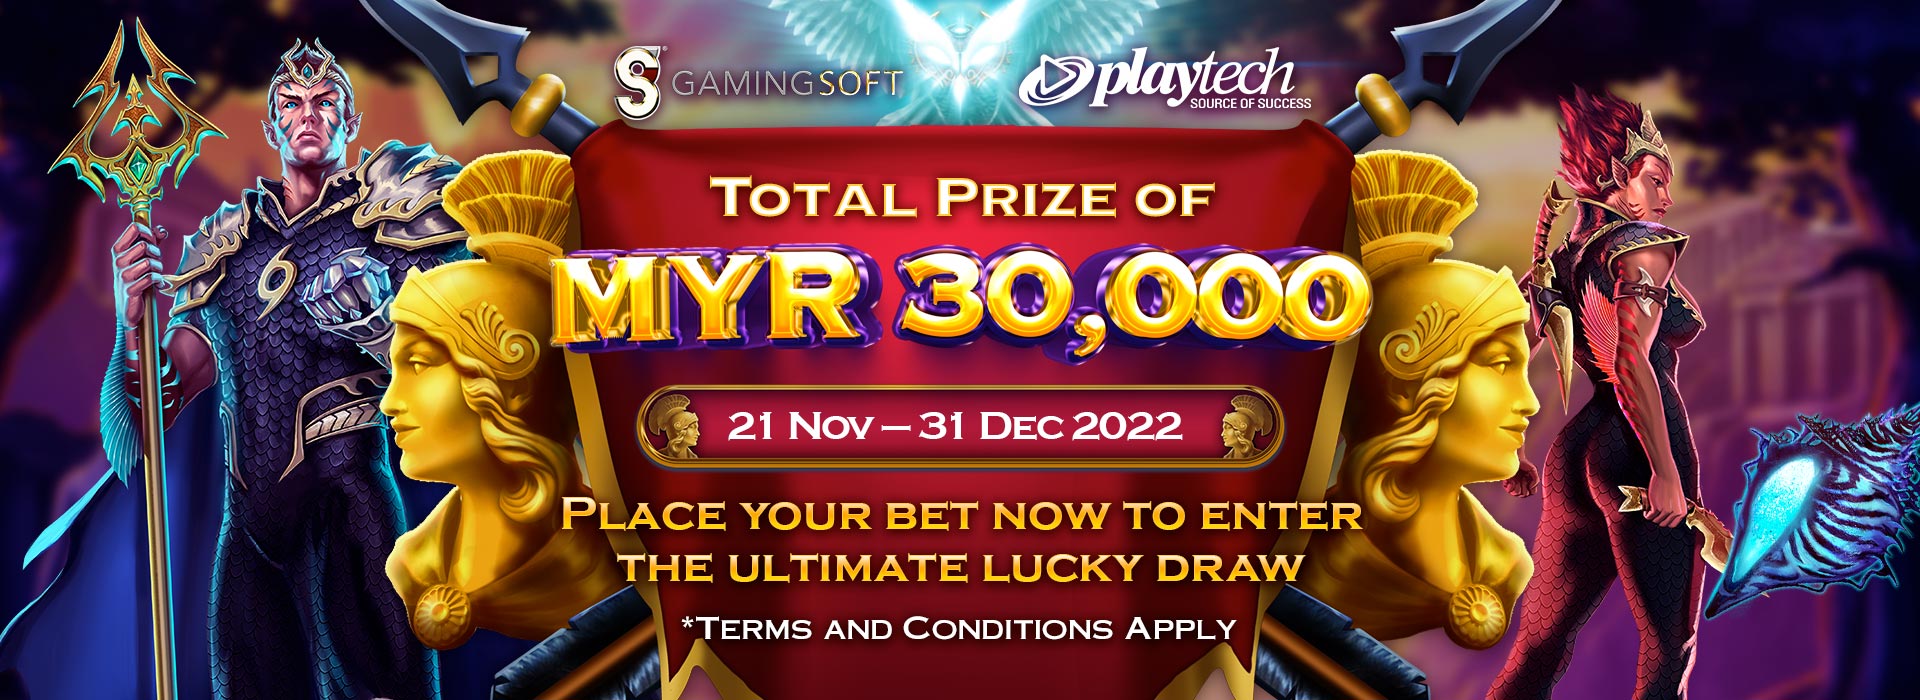 PlayTech Lucky Draw Year End Promotion